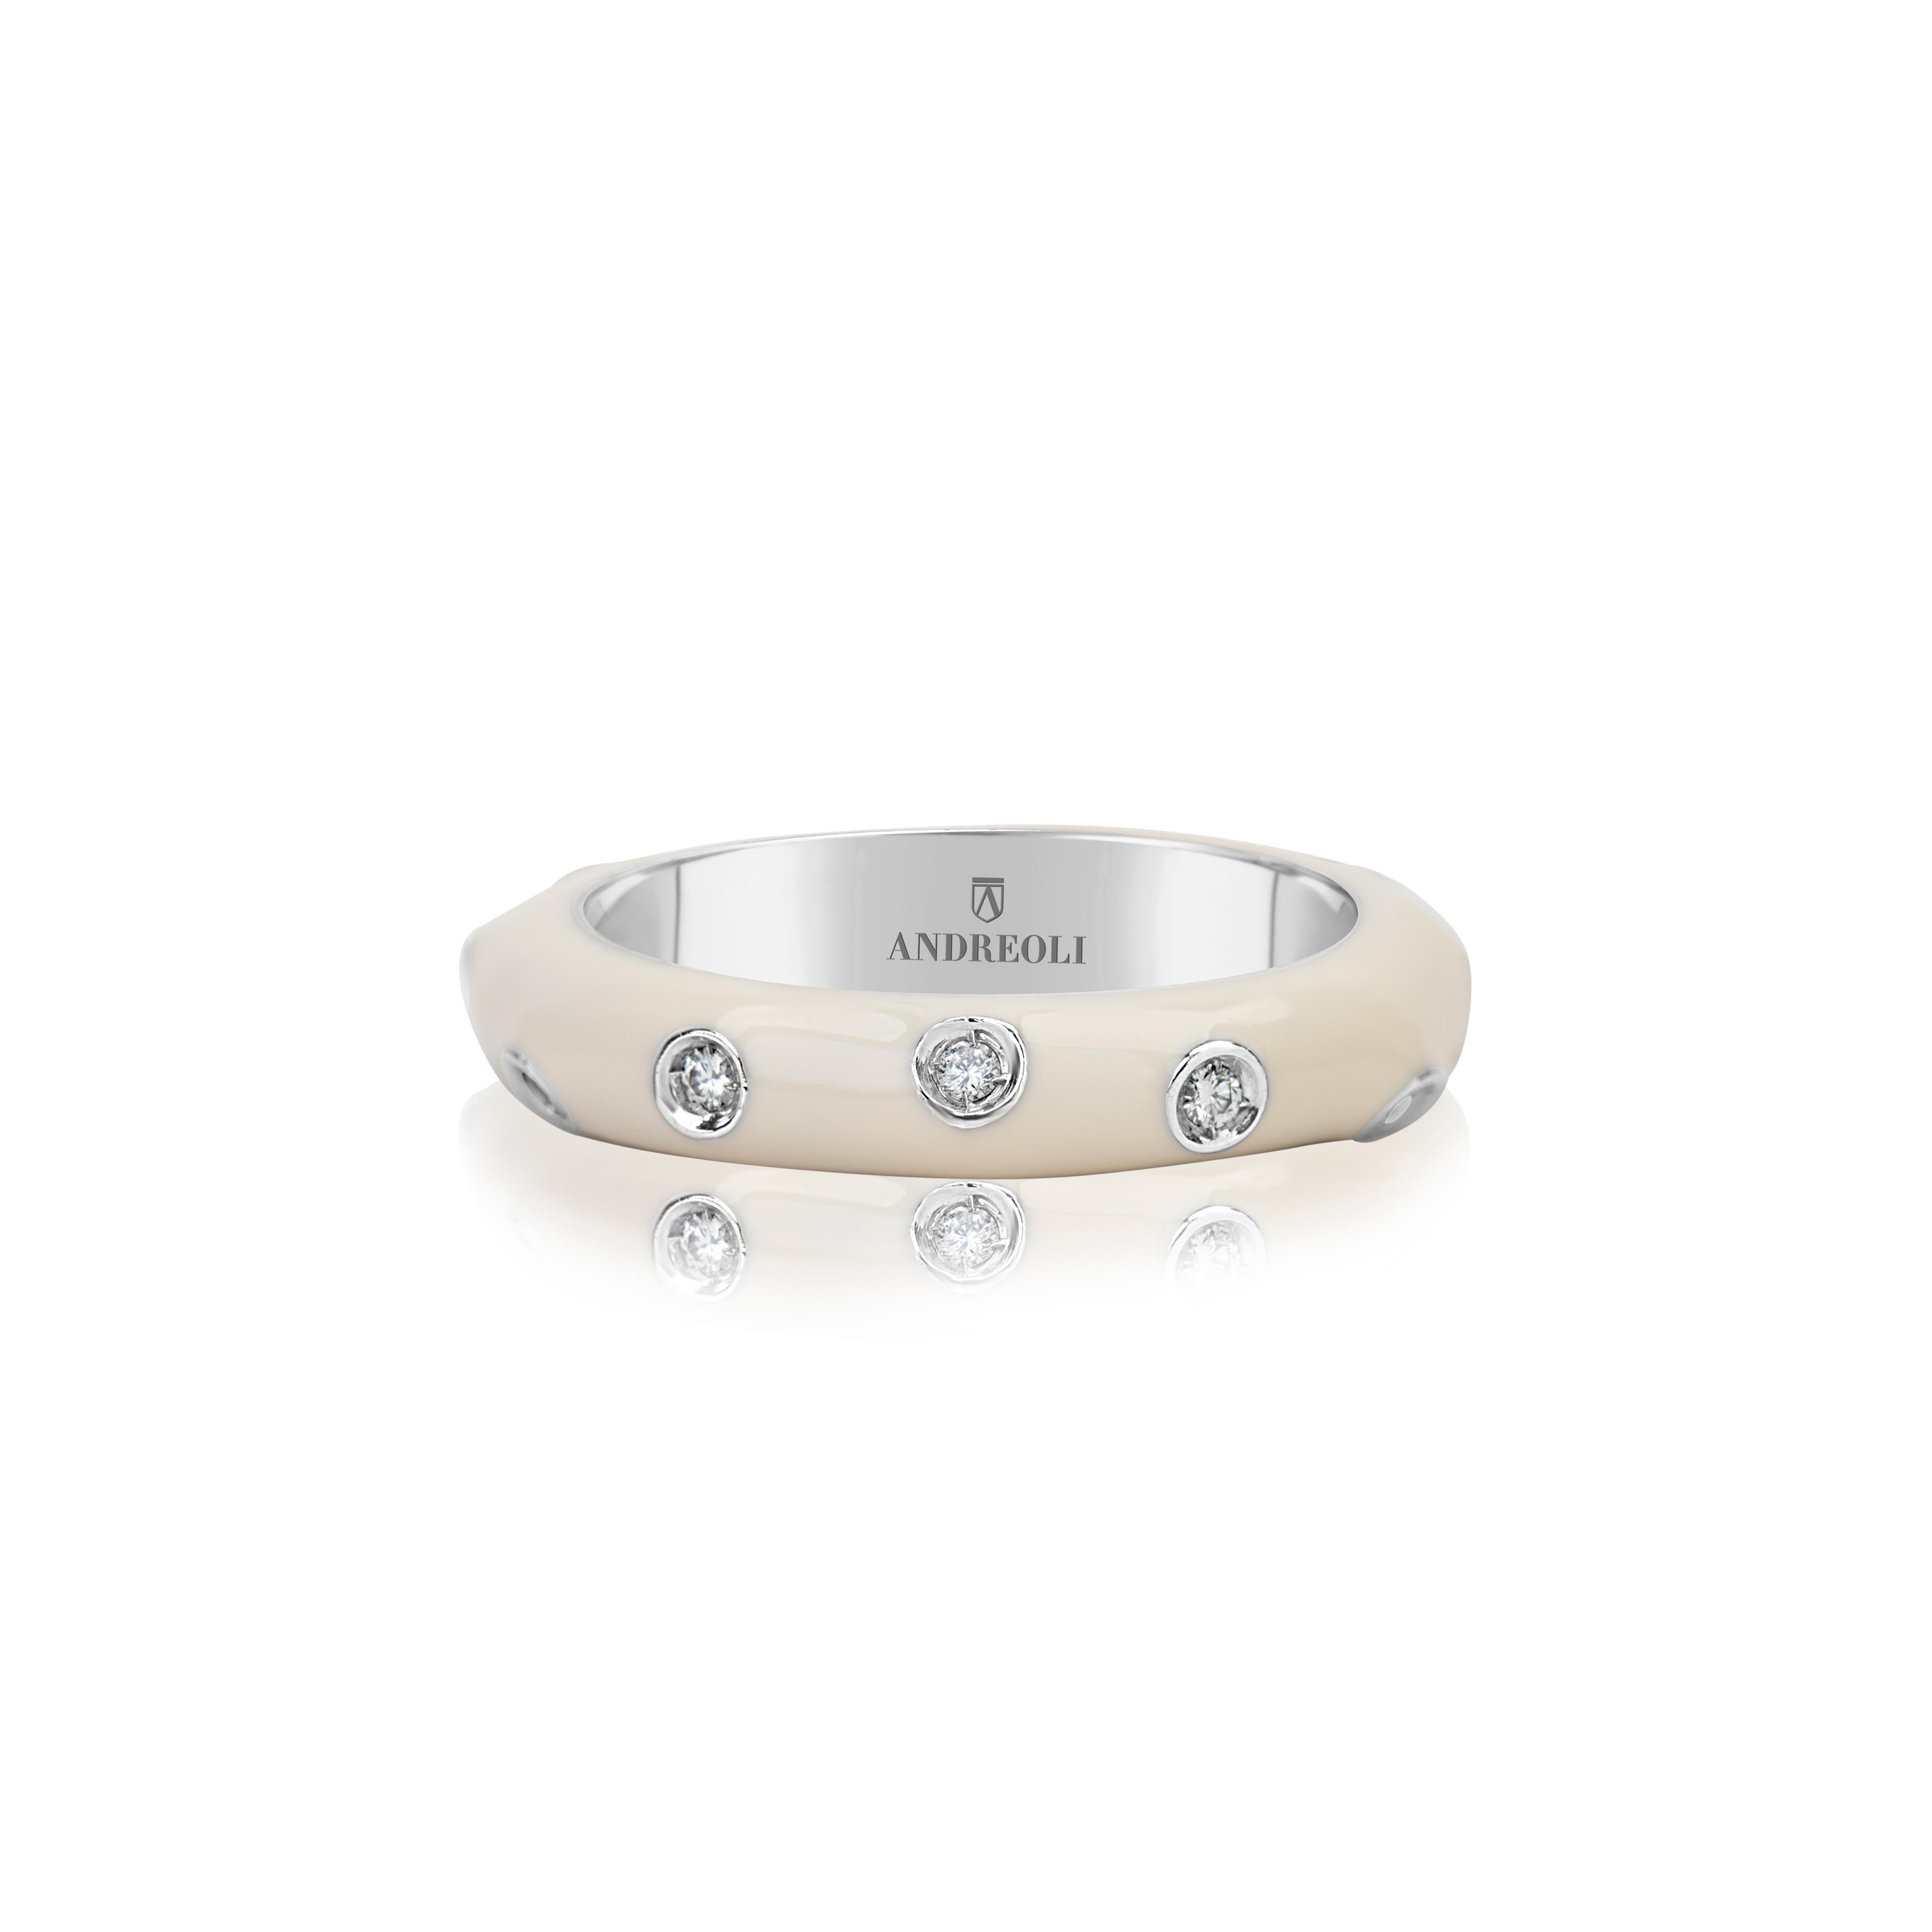 Andreoli White Enamel Diamond Band Ring 18k White Gold

this Andreoli ring features:
- 0.17 carat diamond
- 9.10 gram 18 karat white gold
- White Enamel
- Made in Italy
- 3 sizes available: 6, 6.5, and 7